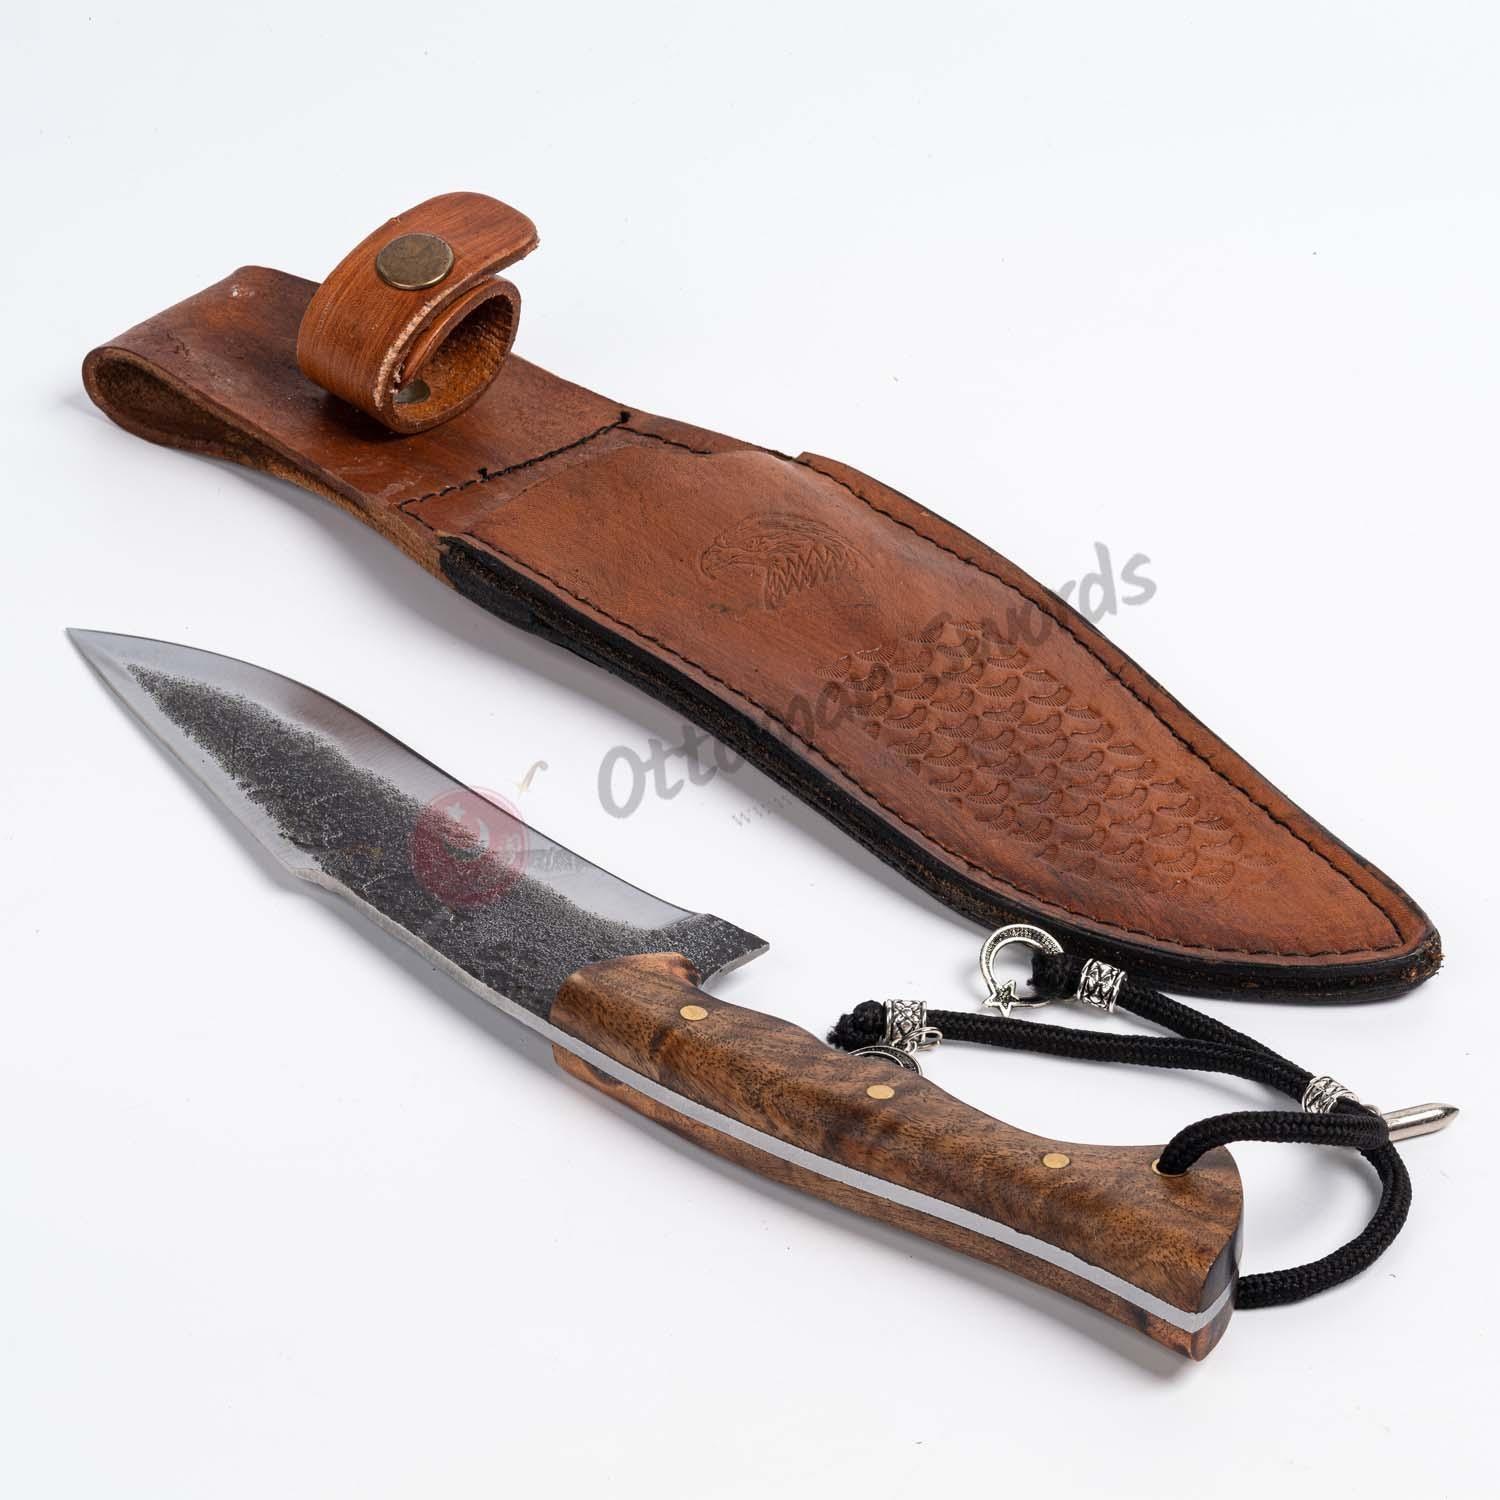 Best Hand Forged Hunting Knives For Sale (4)